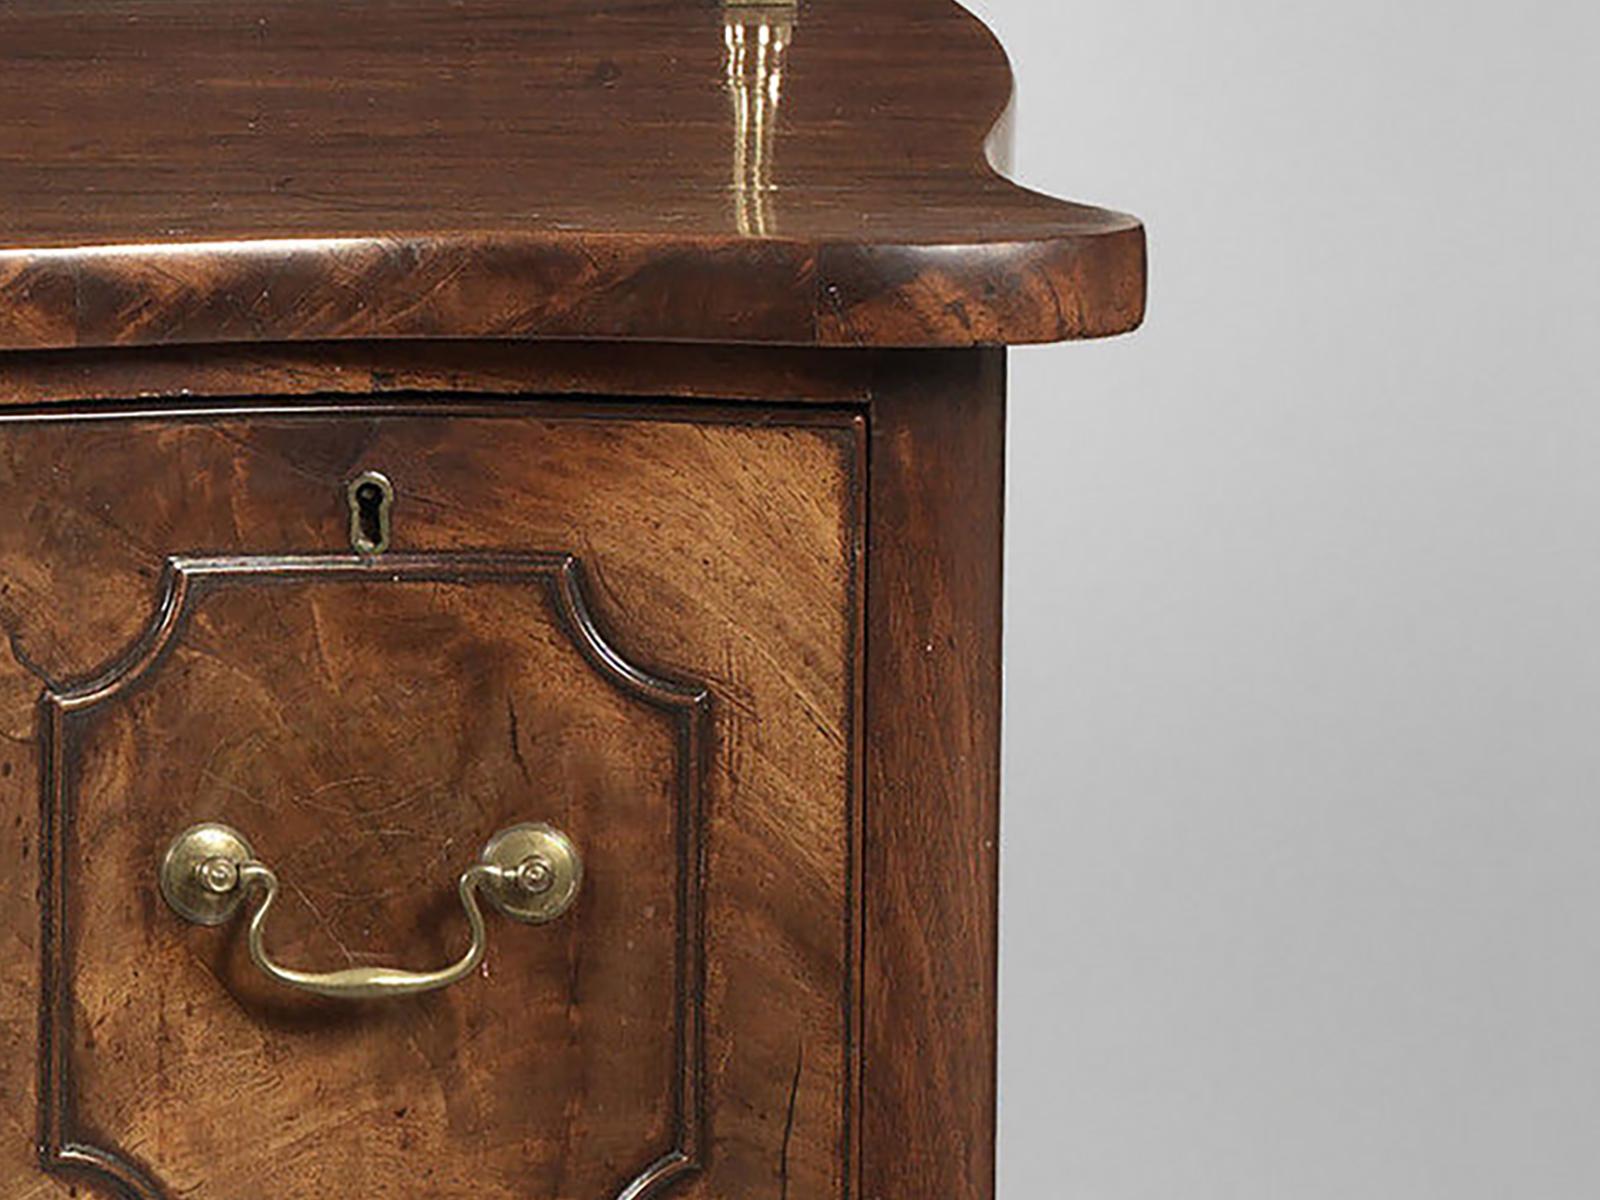 A George III mahogany serpentine fronted sideboard, the shaped top supporting two adjustable brass candle arms, above a central long drawer, flanked by twin drawers; all having fielded panels with astragal mouldings on square legs.

The sideboard